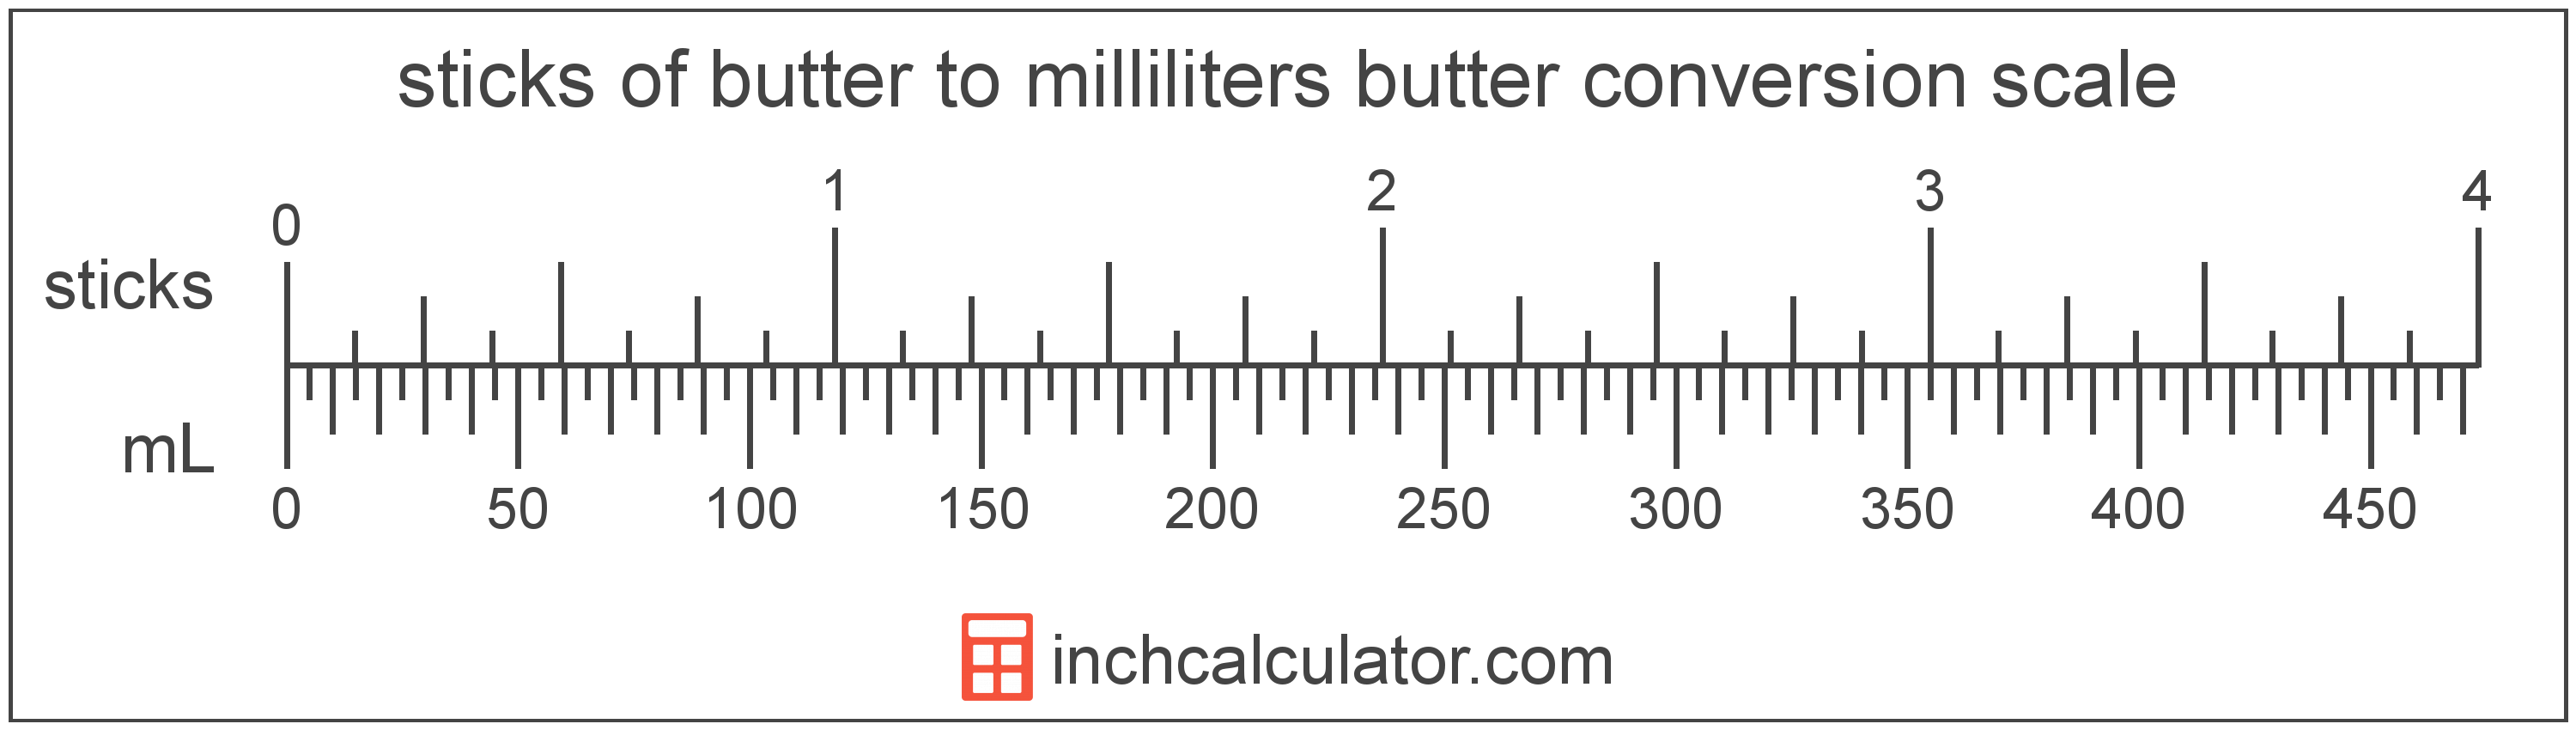 conversion scale showing sticks of butter and equivalent milliliters butter values